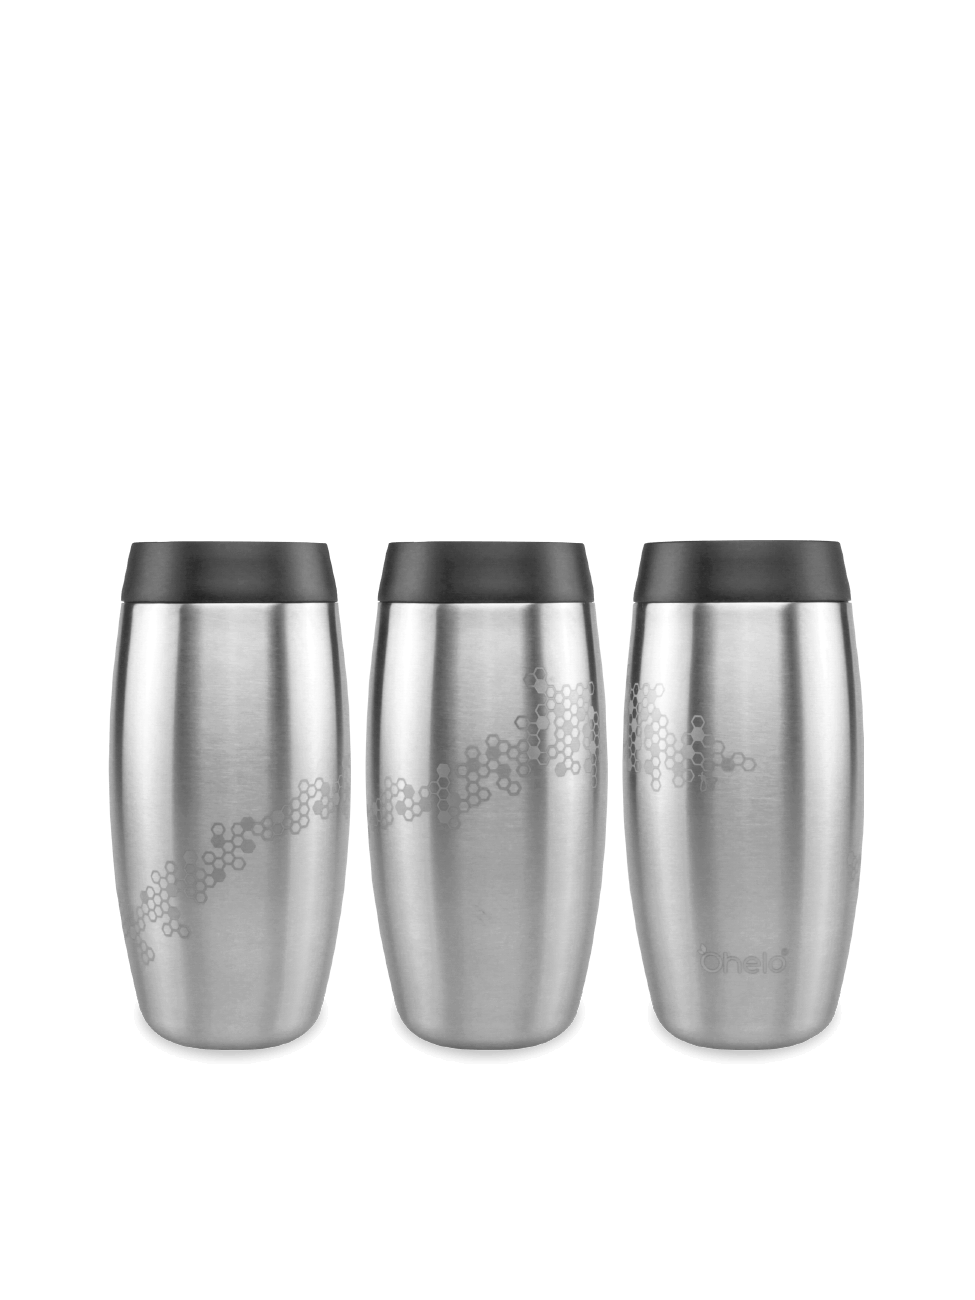 Ohelo stainless steel travel mug in bee design - image showing design from 3 sides